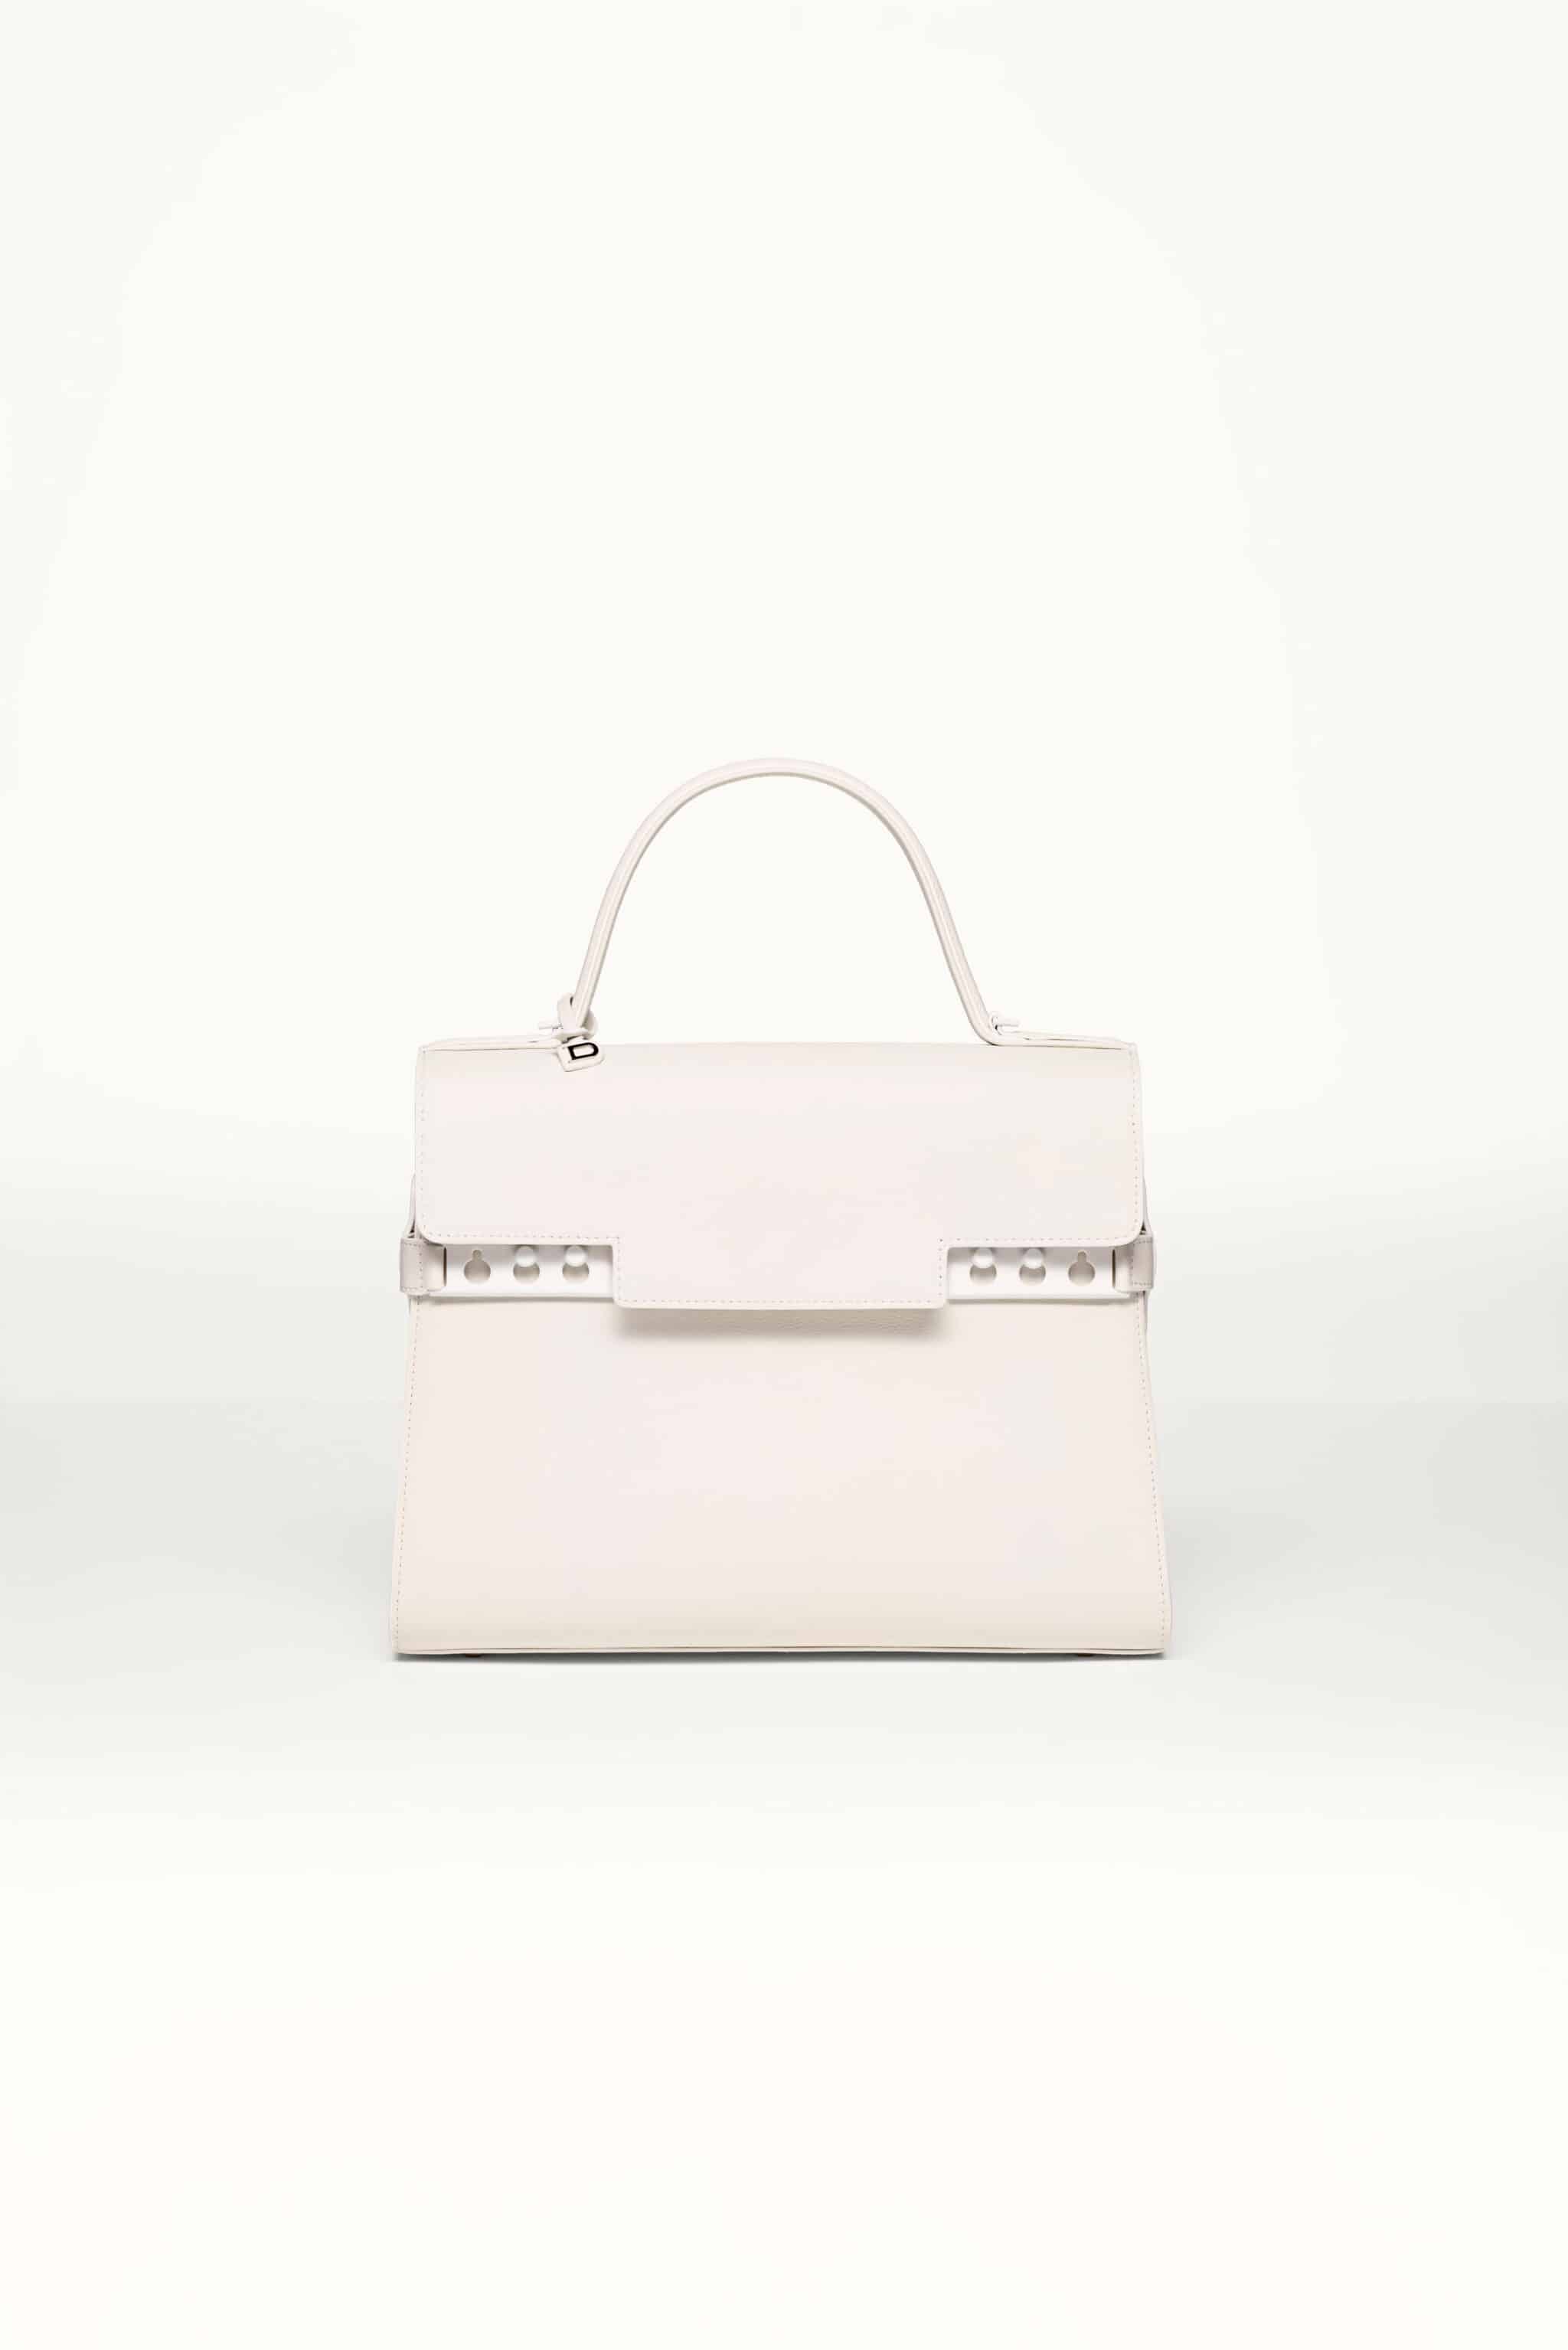 Delvaux Spring/Summer 2017 Bag Collection - Spotted Fashion